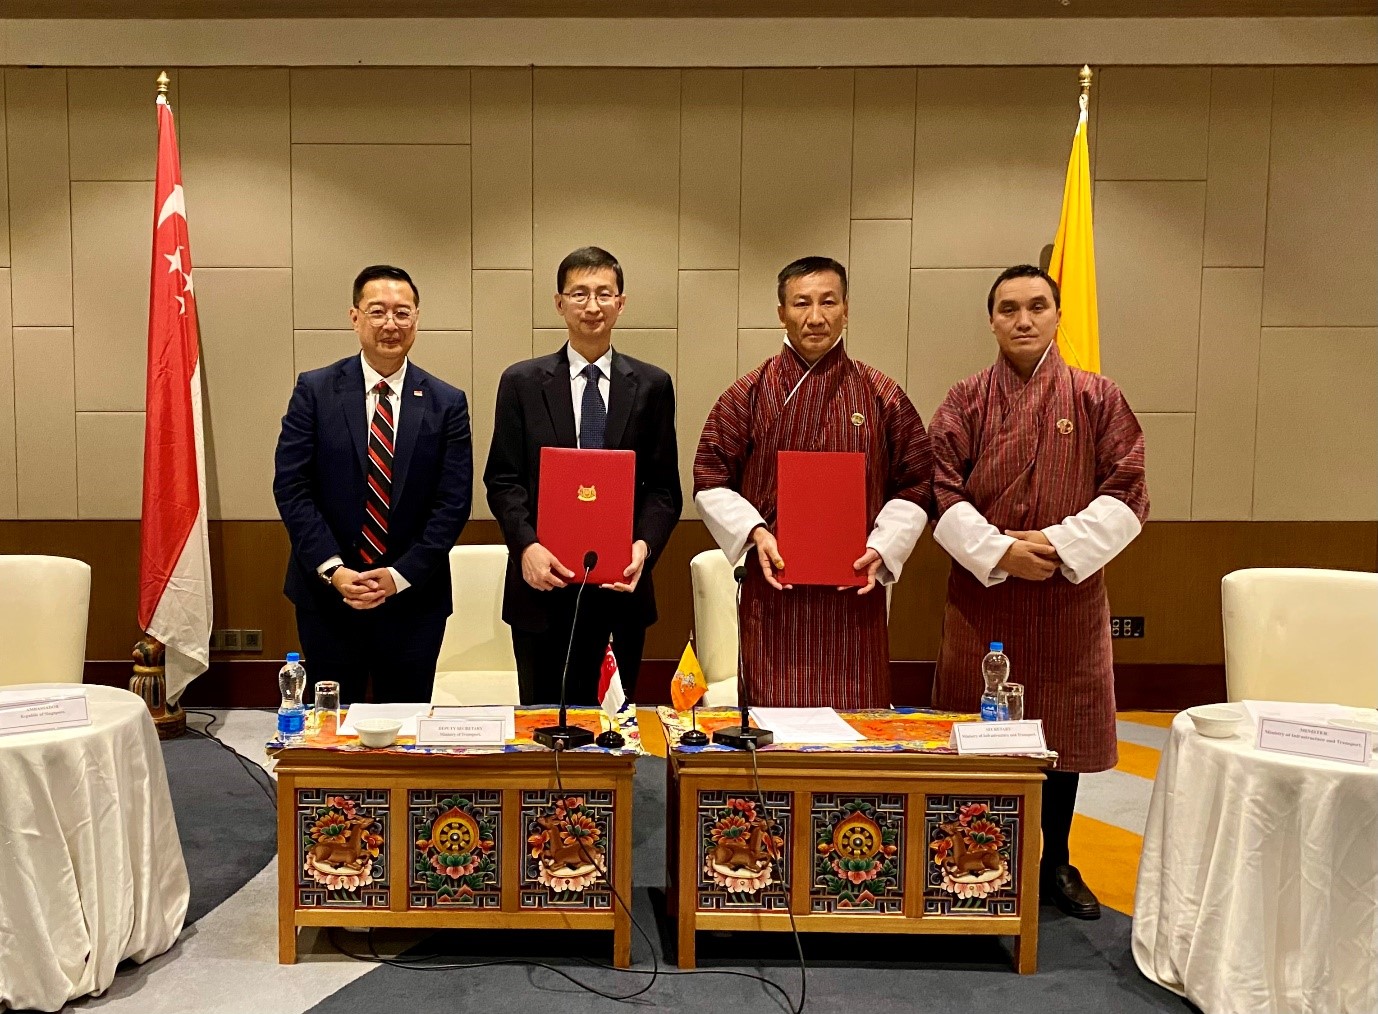 Signing of the MOU on Aircraft Accident and Incident Investigation between the Air Accident Investigation Unit (AAIU), Ministry of Infrastructure and Transport, Kingdom of Bhutan and the Transport Safety Investigation Bureau (TSIB) of Singapore